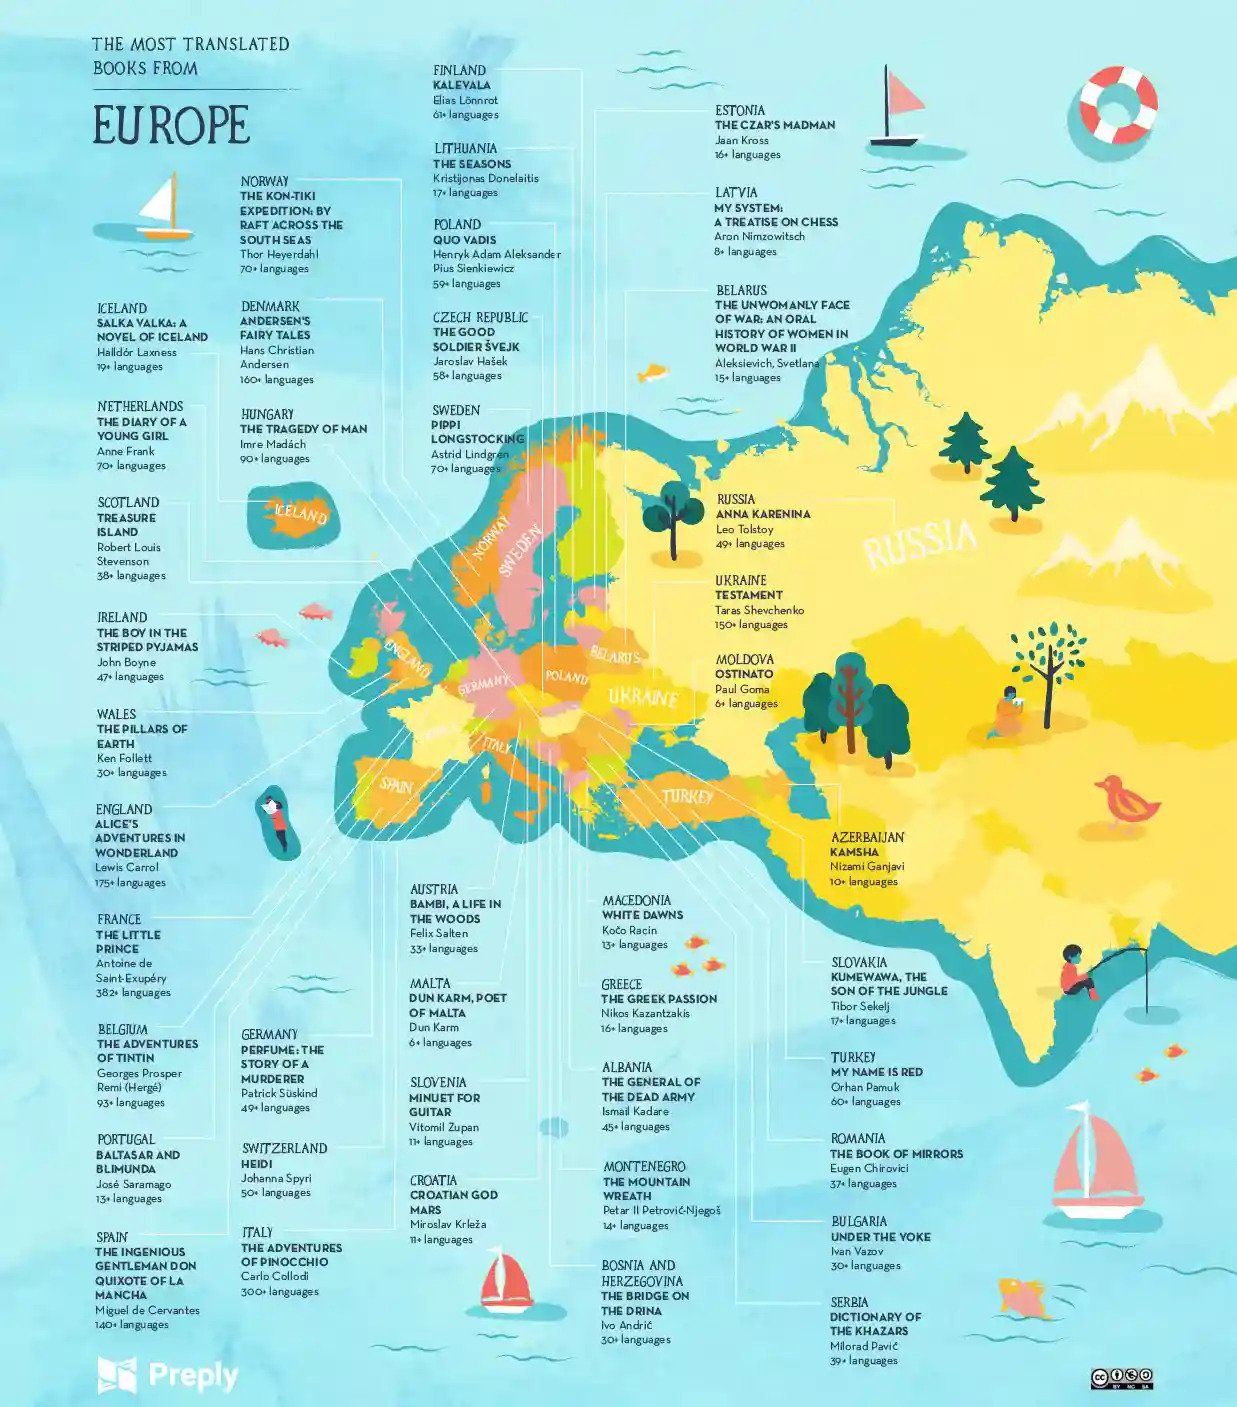 Most translated books in Europe map